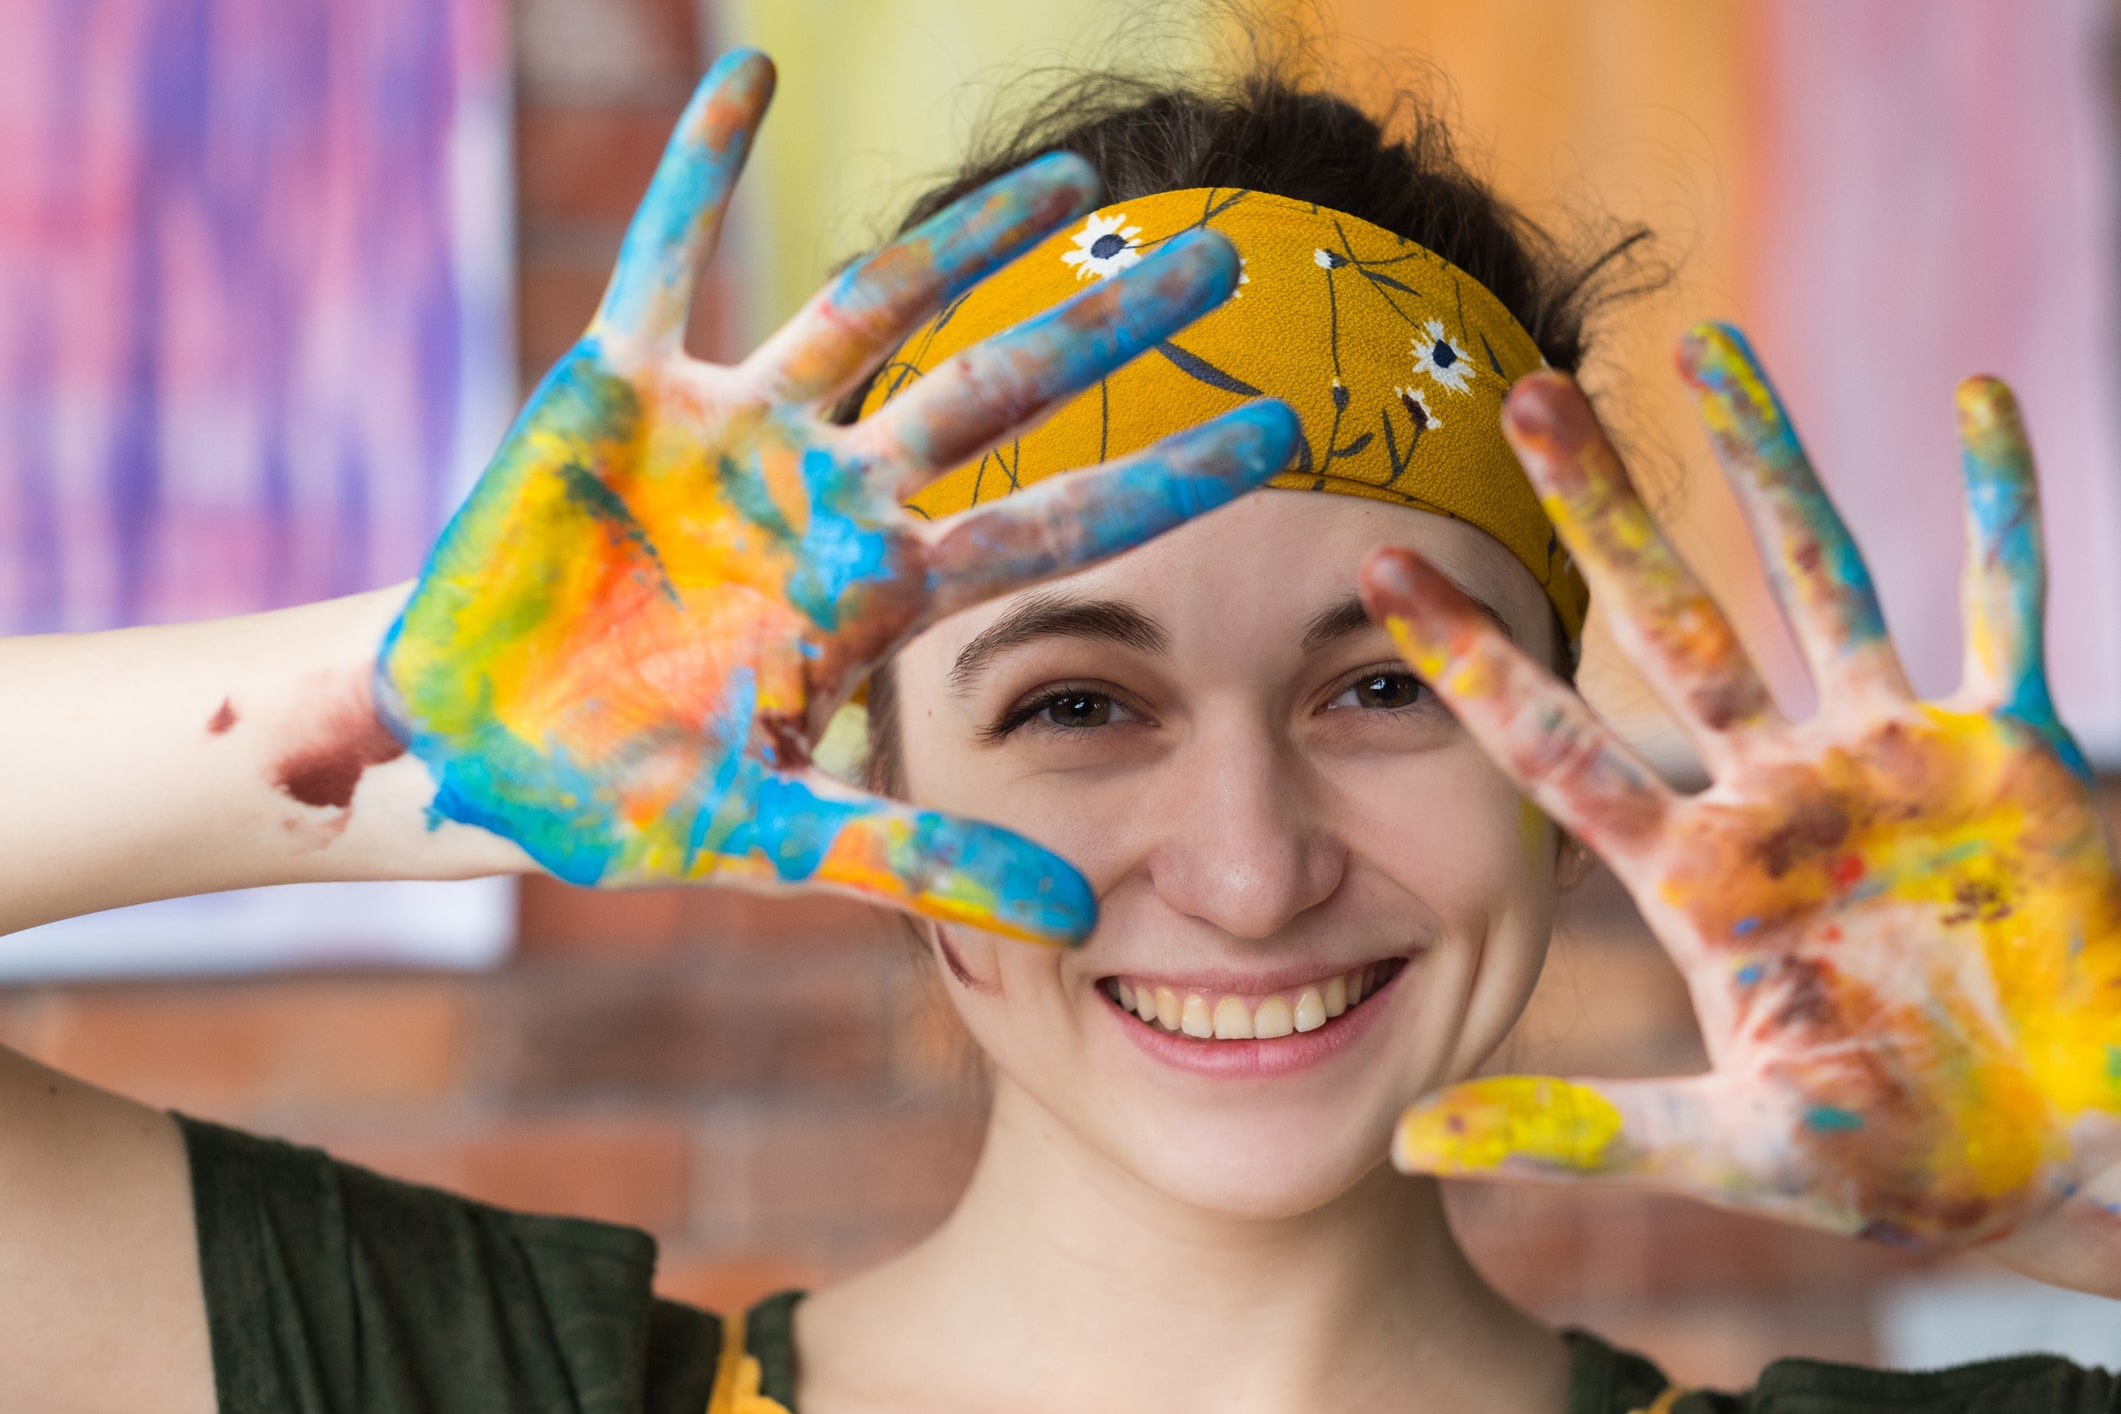 Girl showing her hands covered in paint.